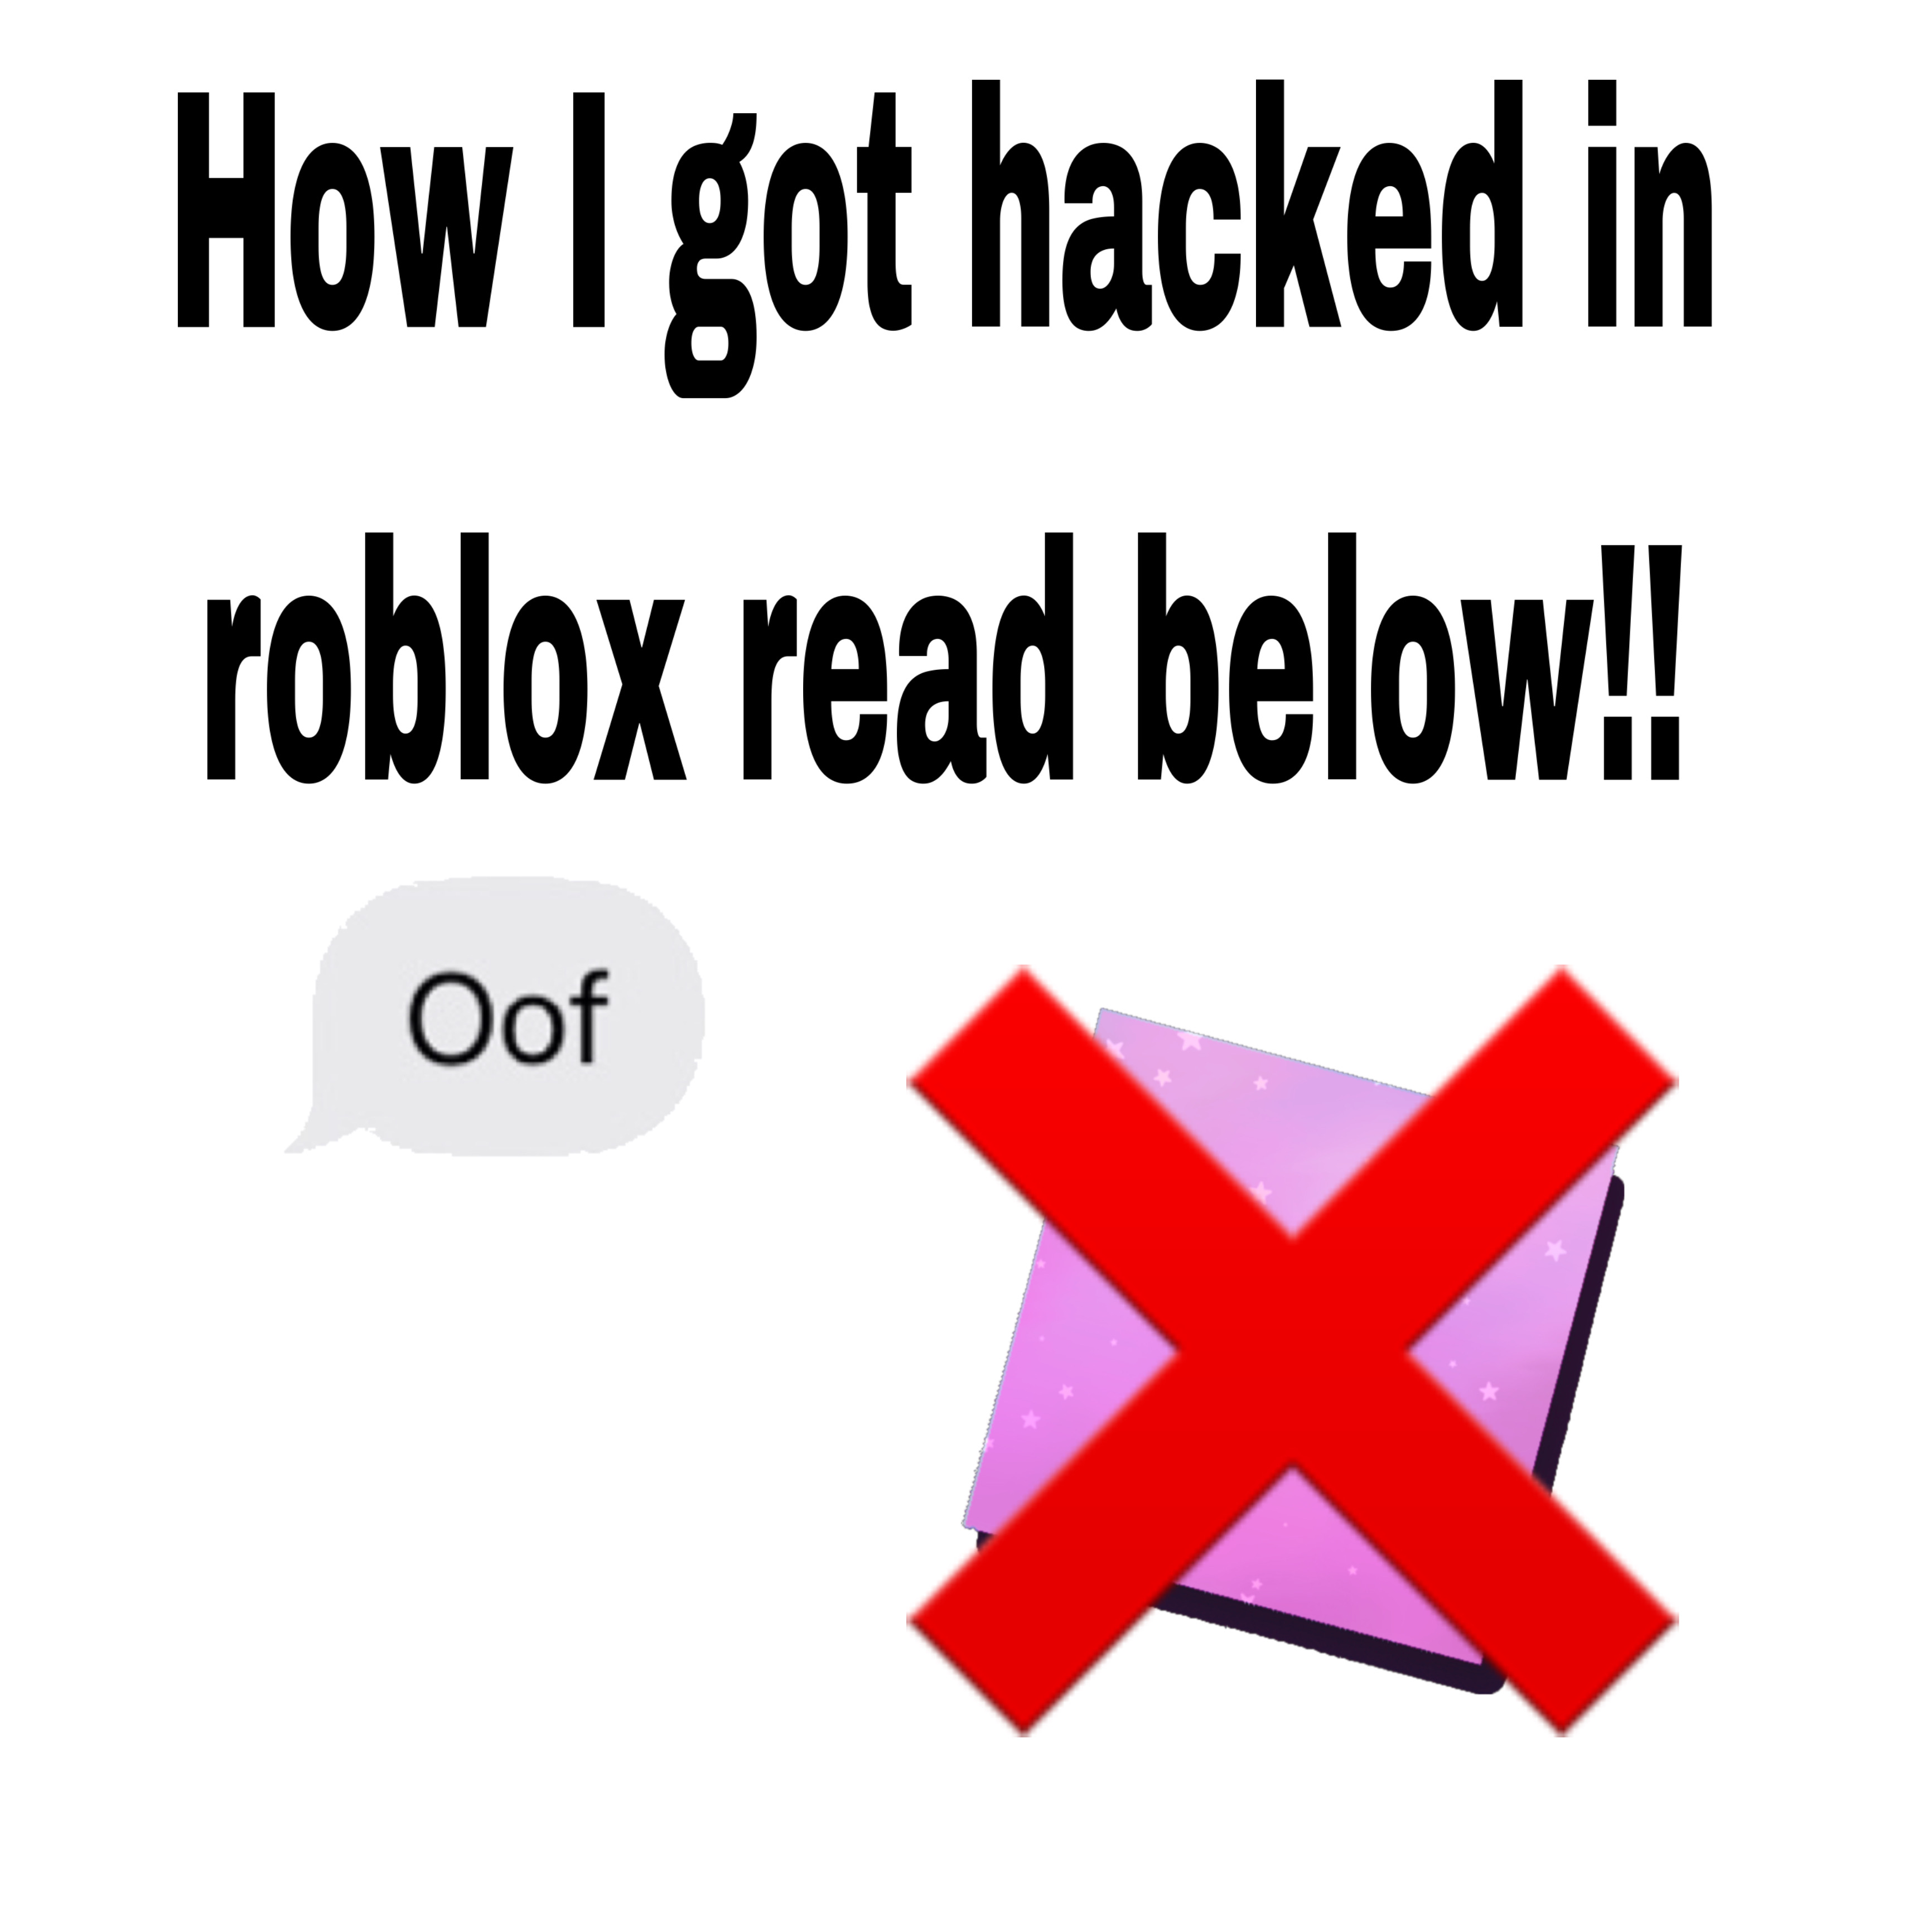 One Day I Was About To Image By Kenzie - roblox deja oof